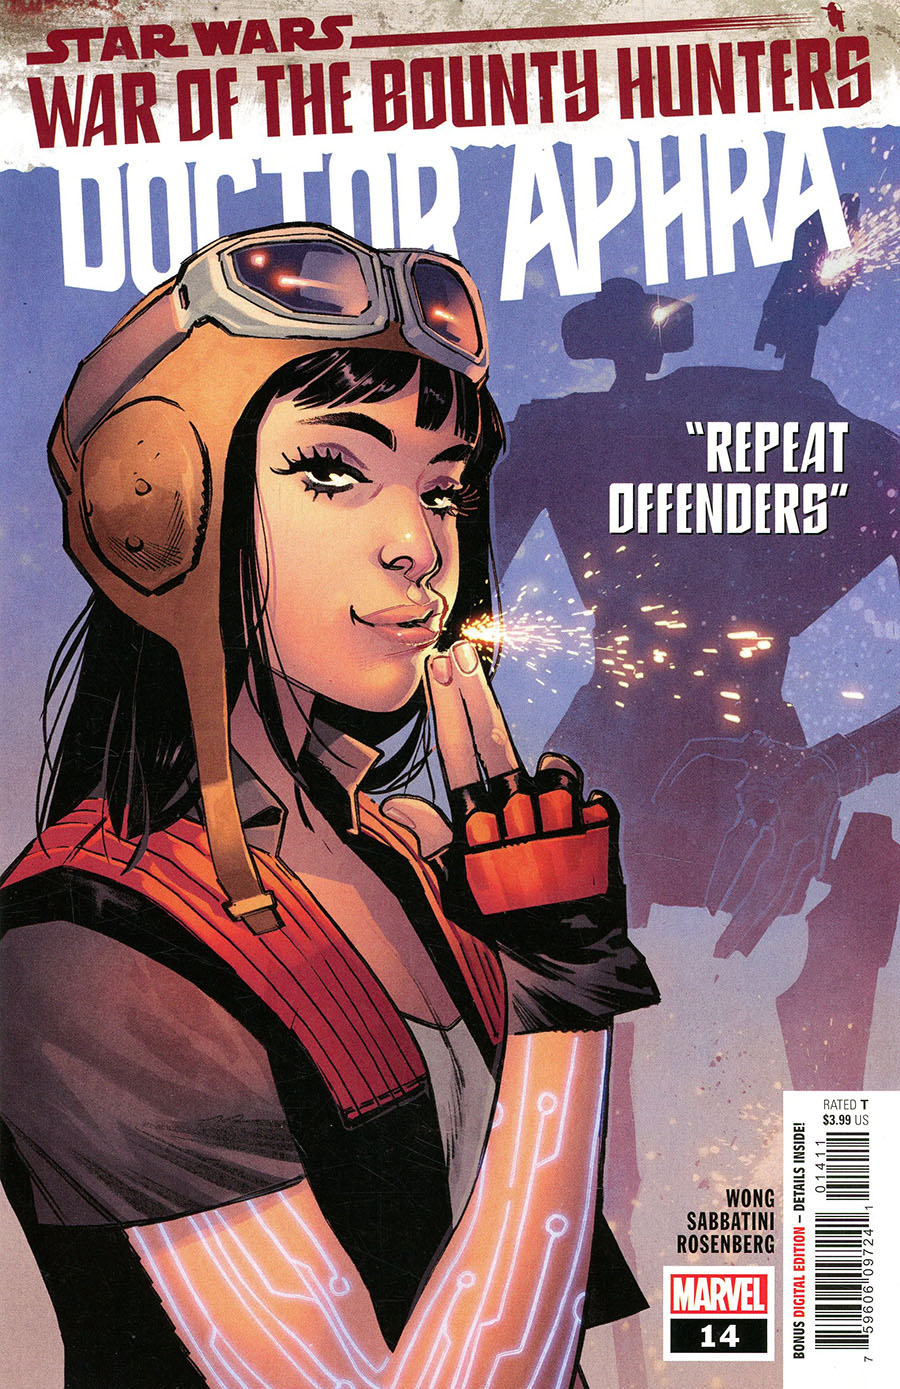 Star Wars Doctor Aphra Vol 2 #14 Cover A Regular Sara Pichelli Cover (War Of The Bounty Hunters Tie-In)